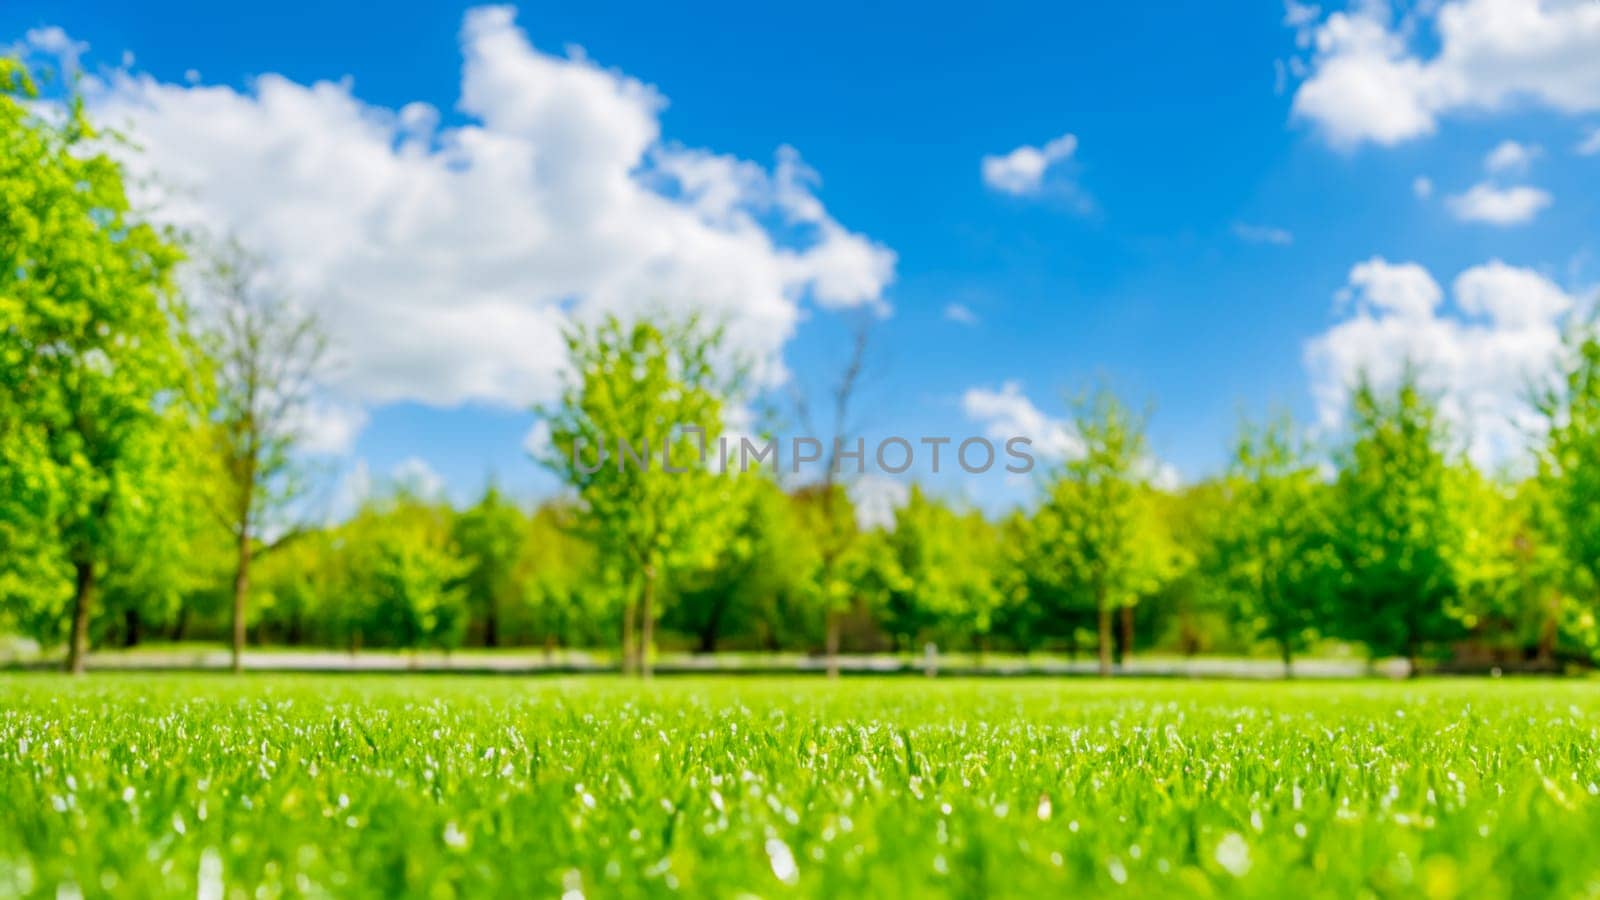 Green grass and blue sky with white clouds in the park in spring by DesignMarjolein